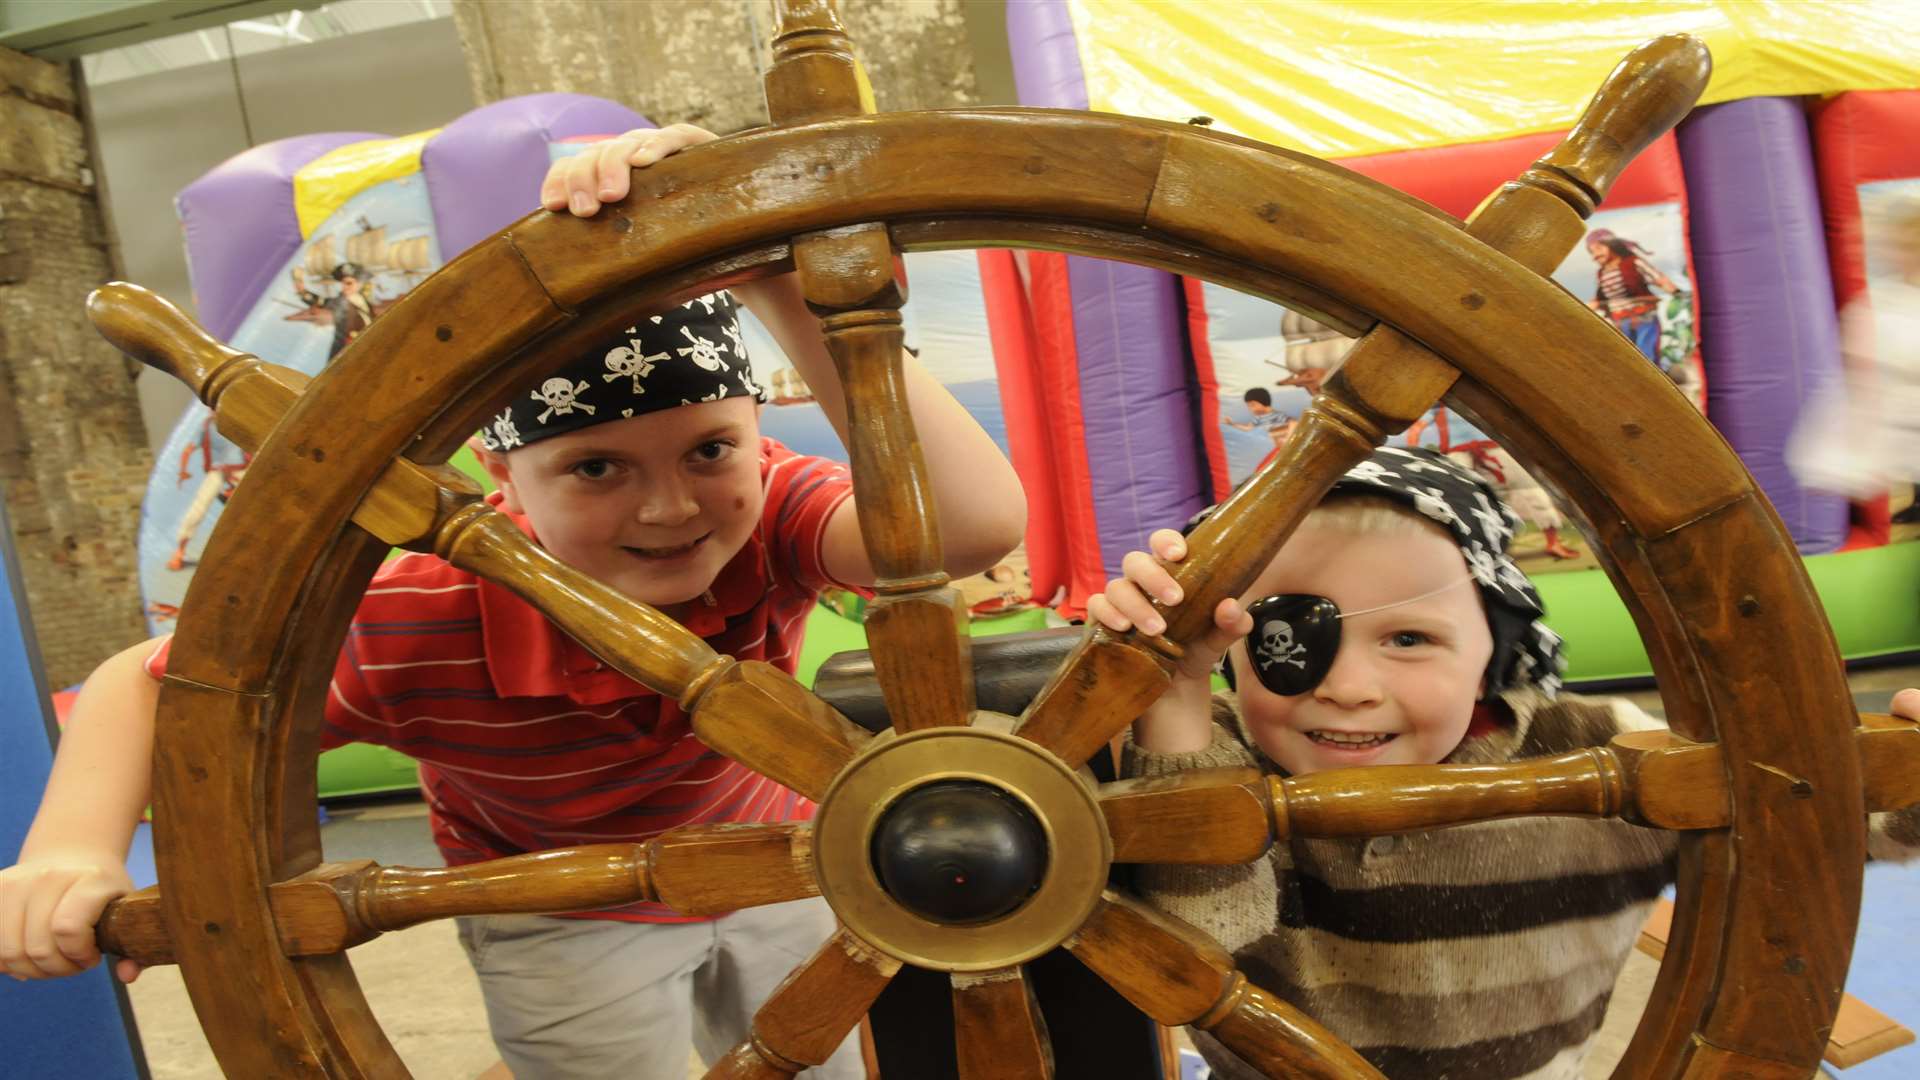 Pirate play days on offer at Chatham Dockyard